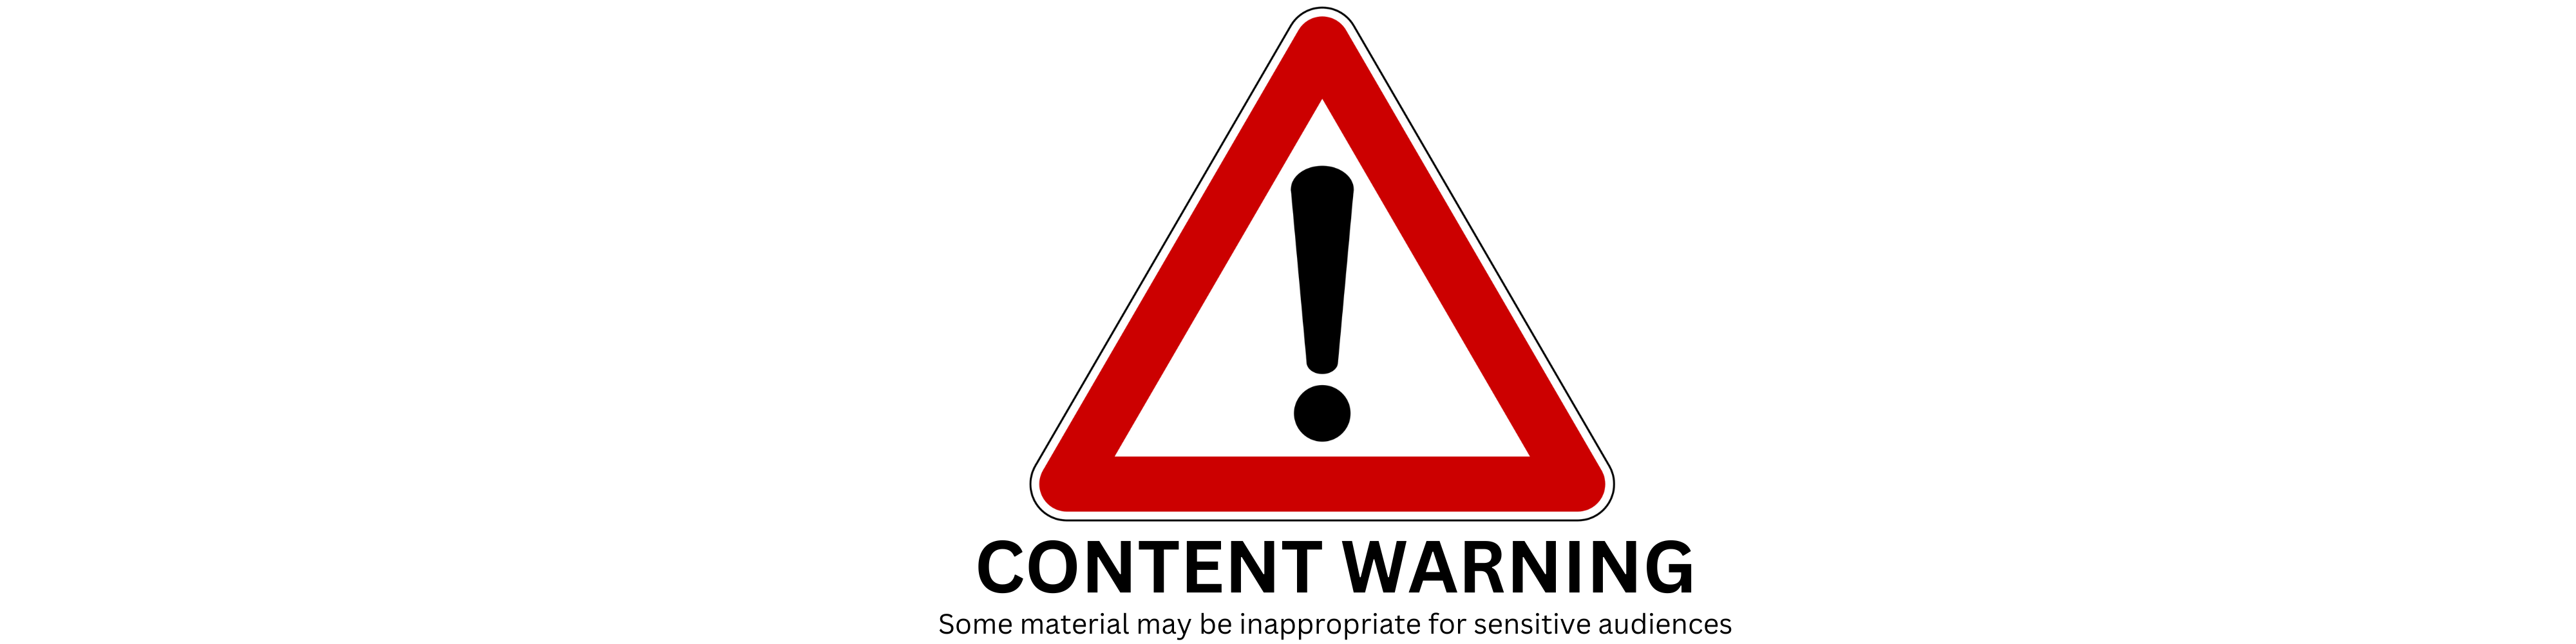 Red triangle with exclamation mark with label "Content Warning" below